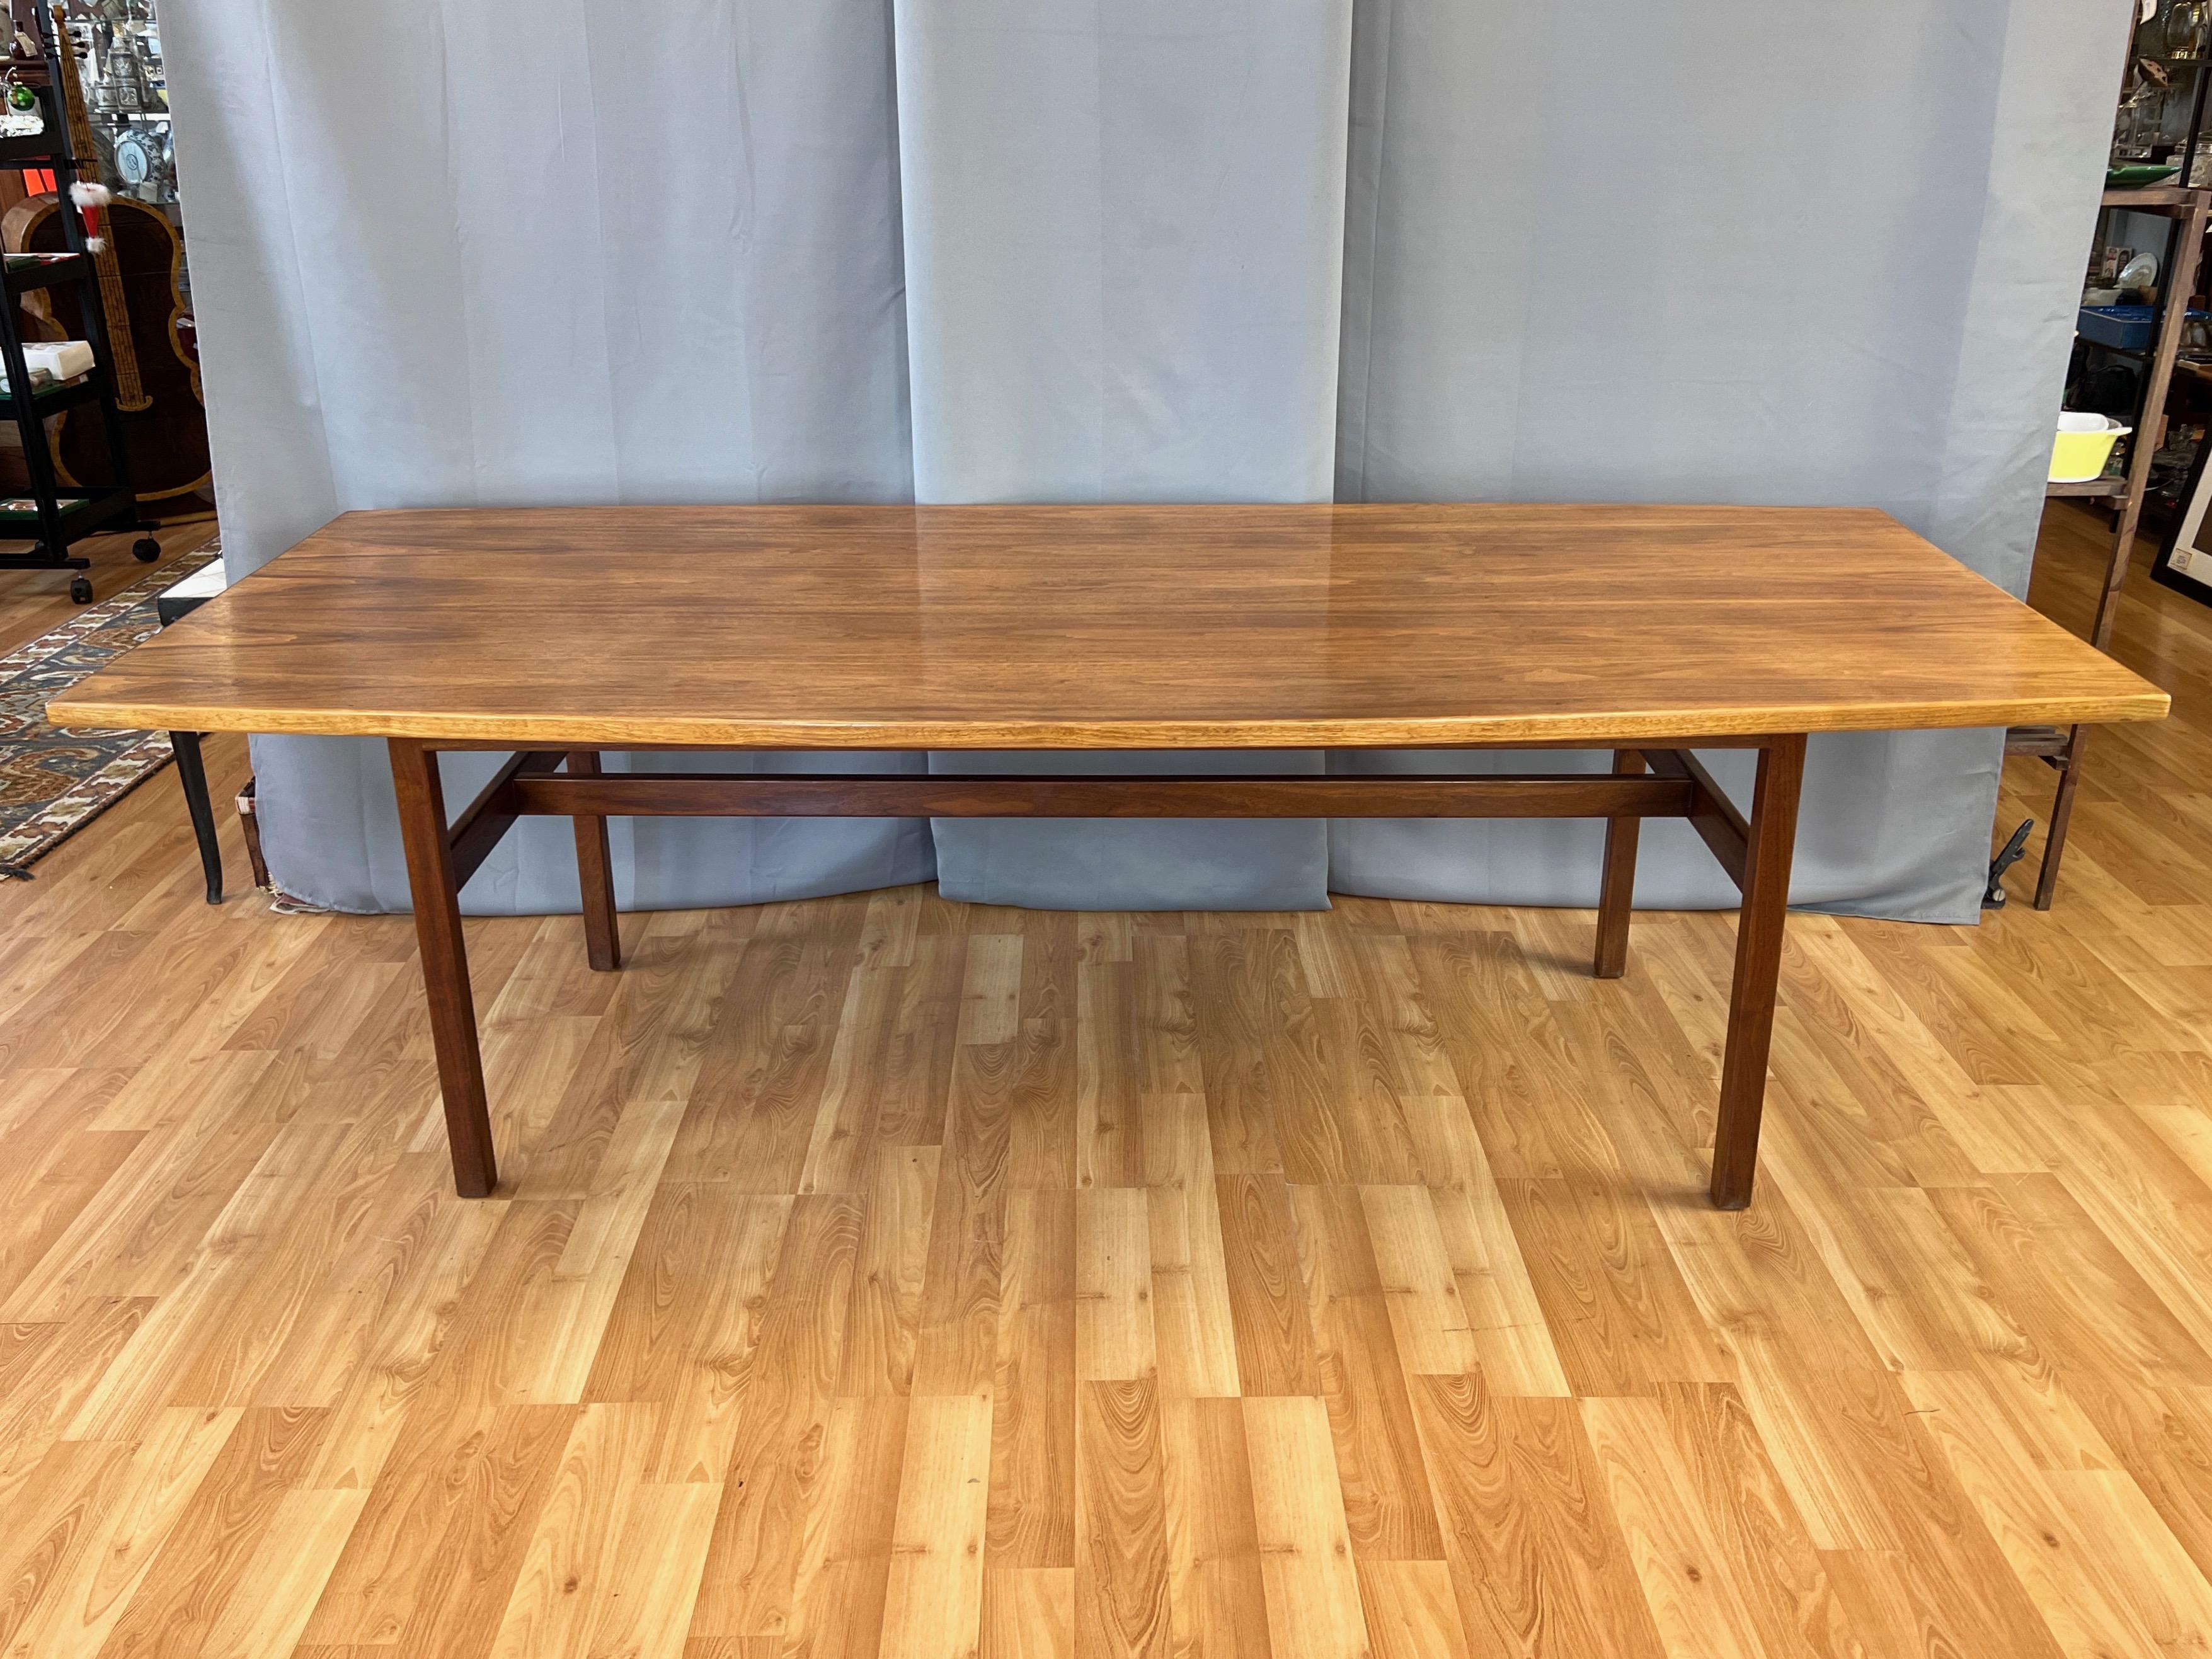 A 1960s mid-century modern eight-foot-long bowed-edge walnut dining table by Danish-American designer Jens Risom, a pioneer in introducing Scandinavian design principles to the United States.

Seats eight to ten, with the boat-shaped or